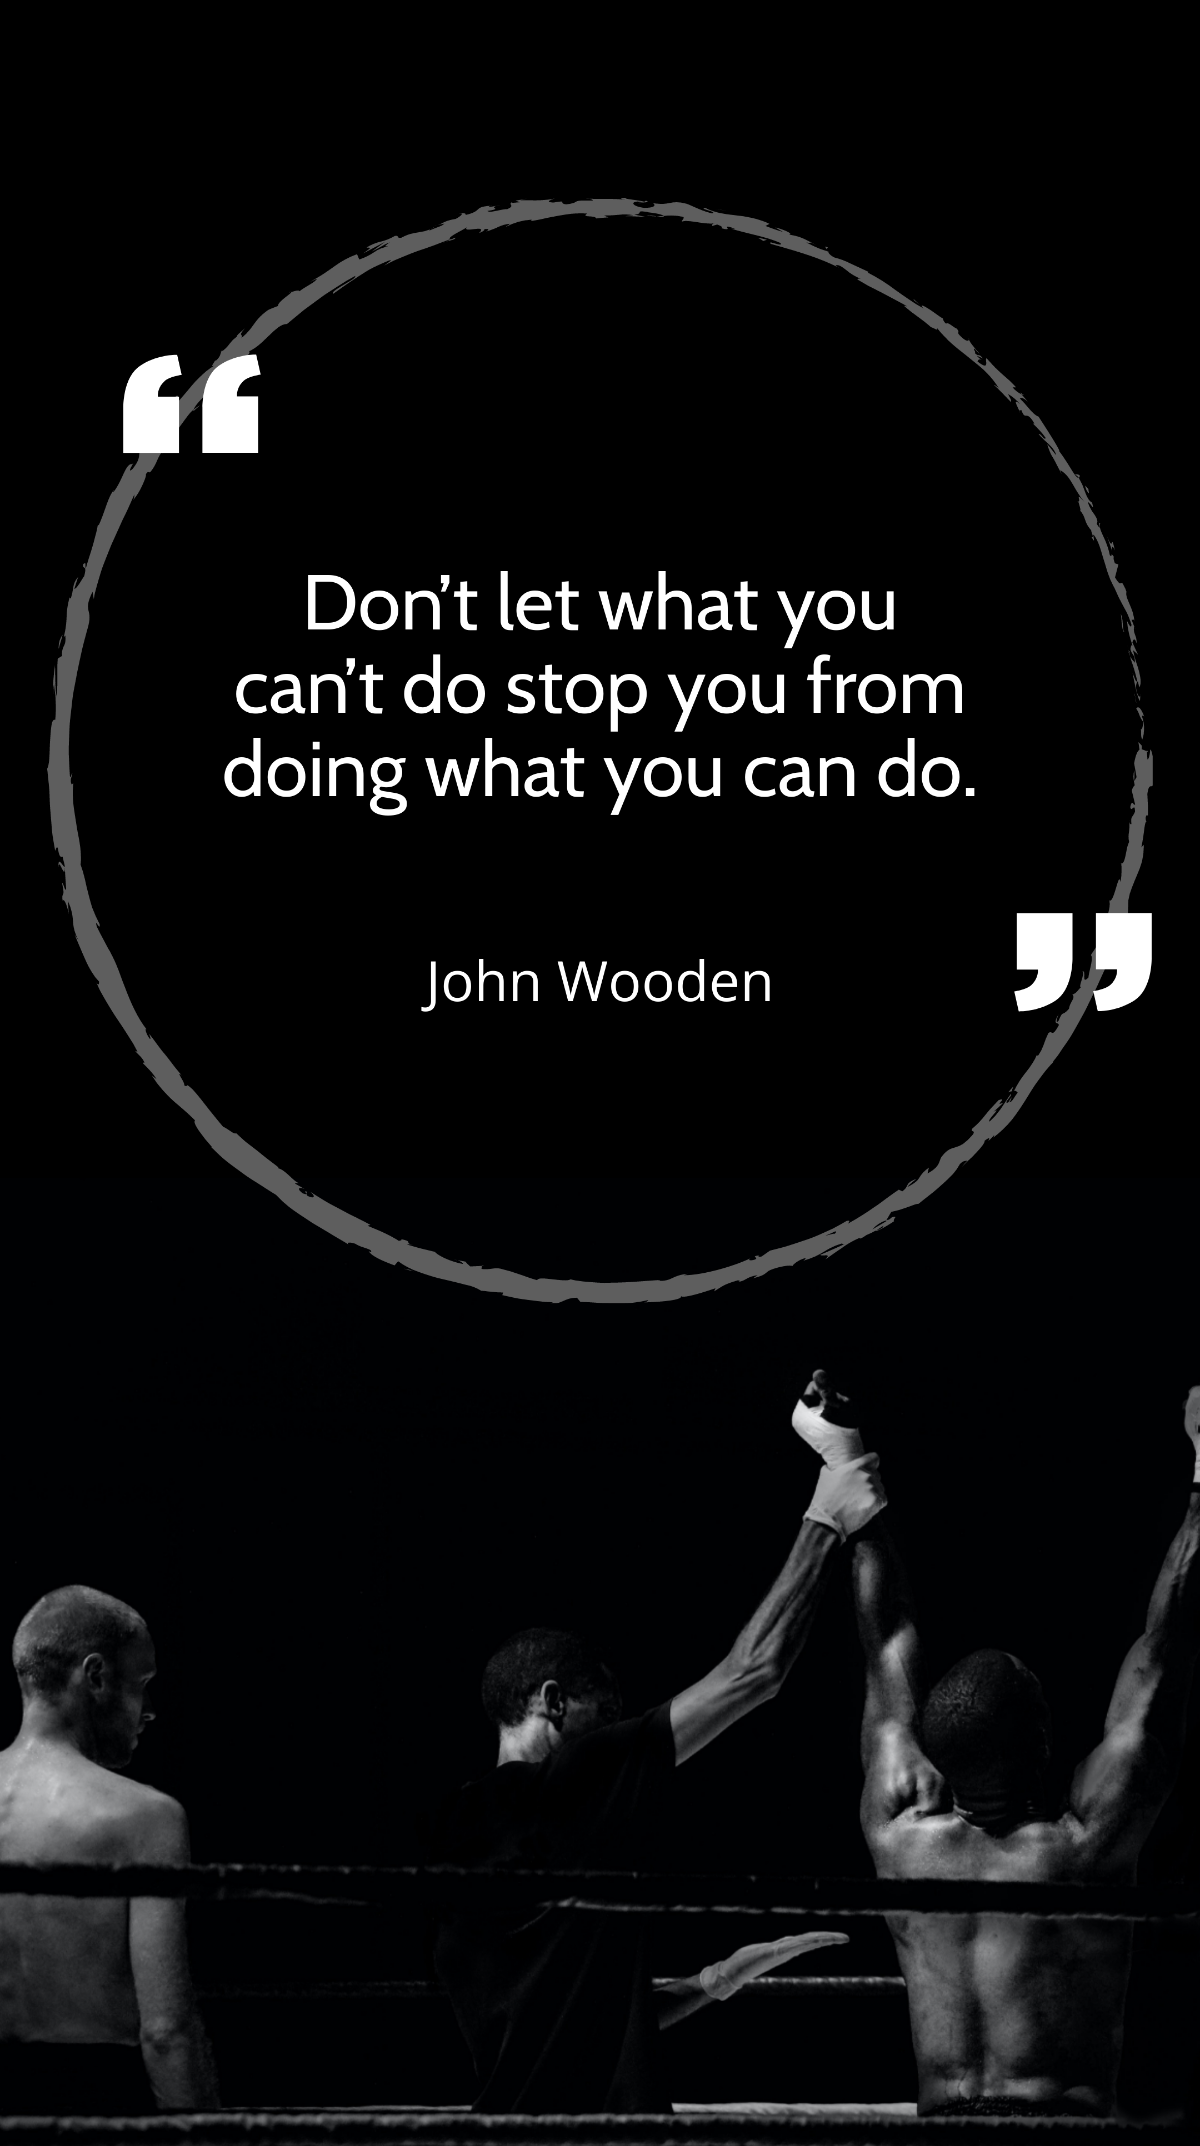 John Wooden - Don’t let what you can’t do stop you from doing what you can do. Template